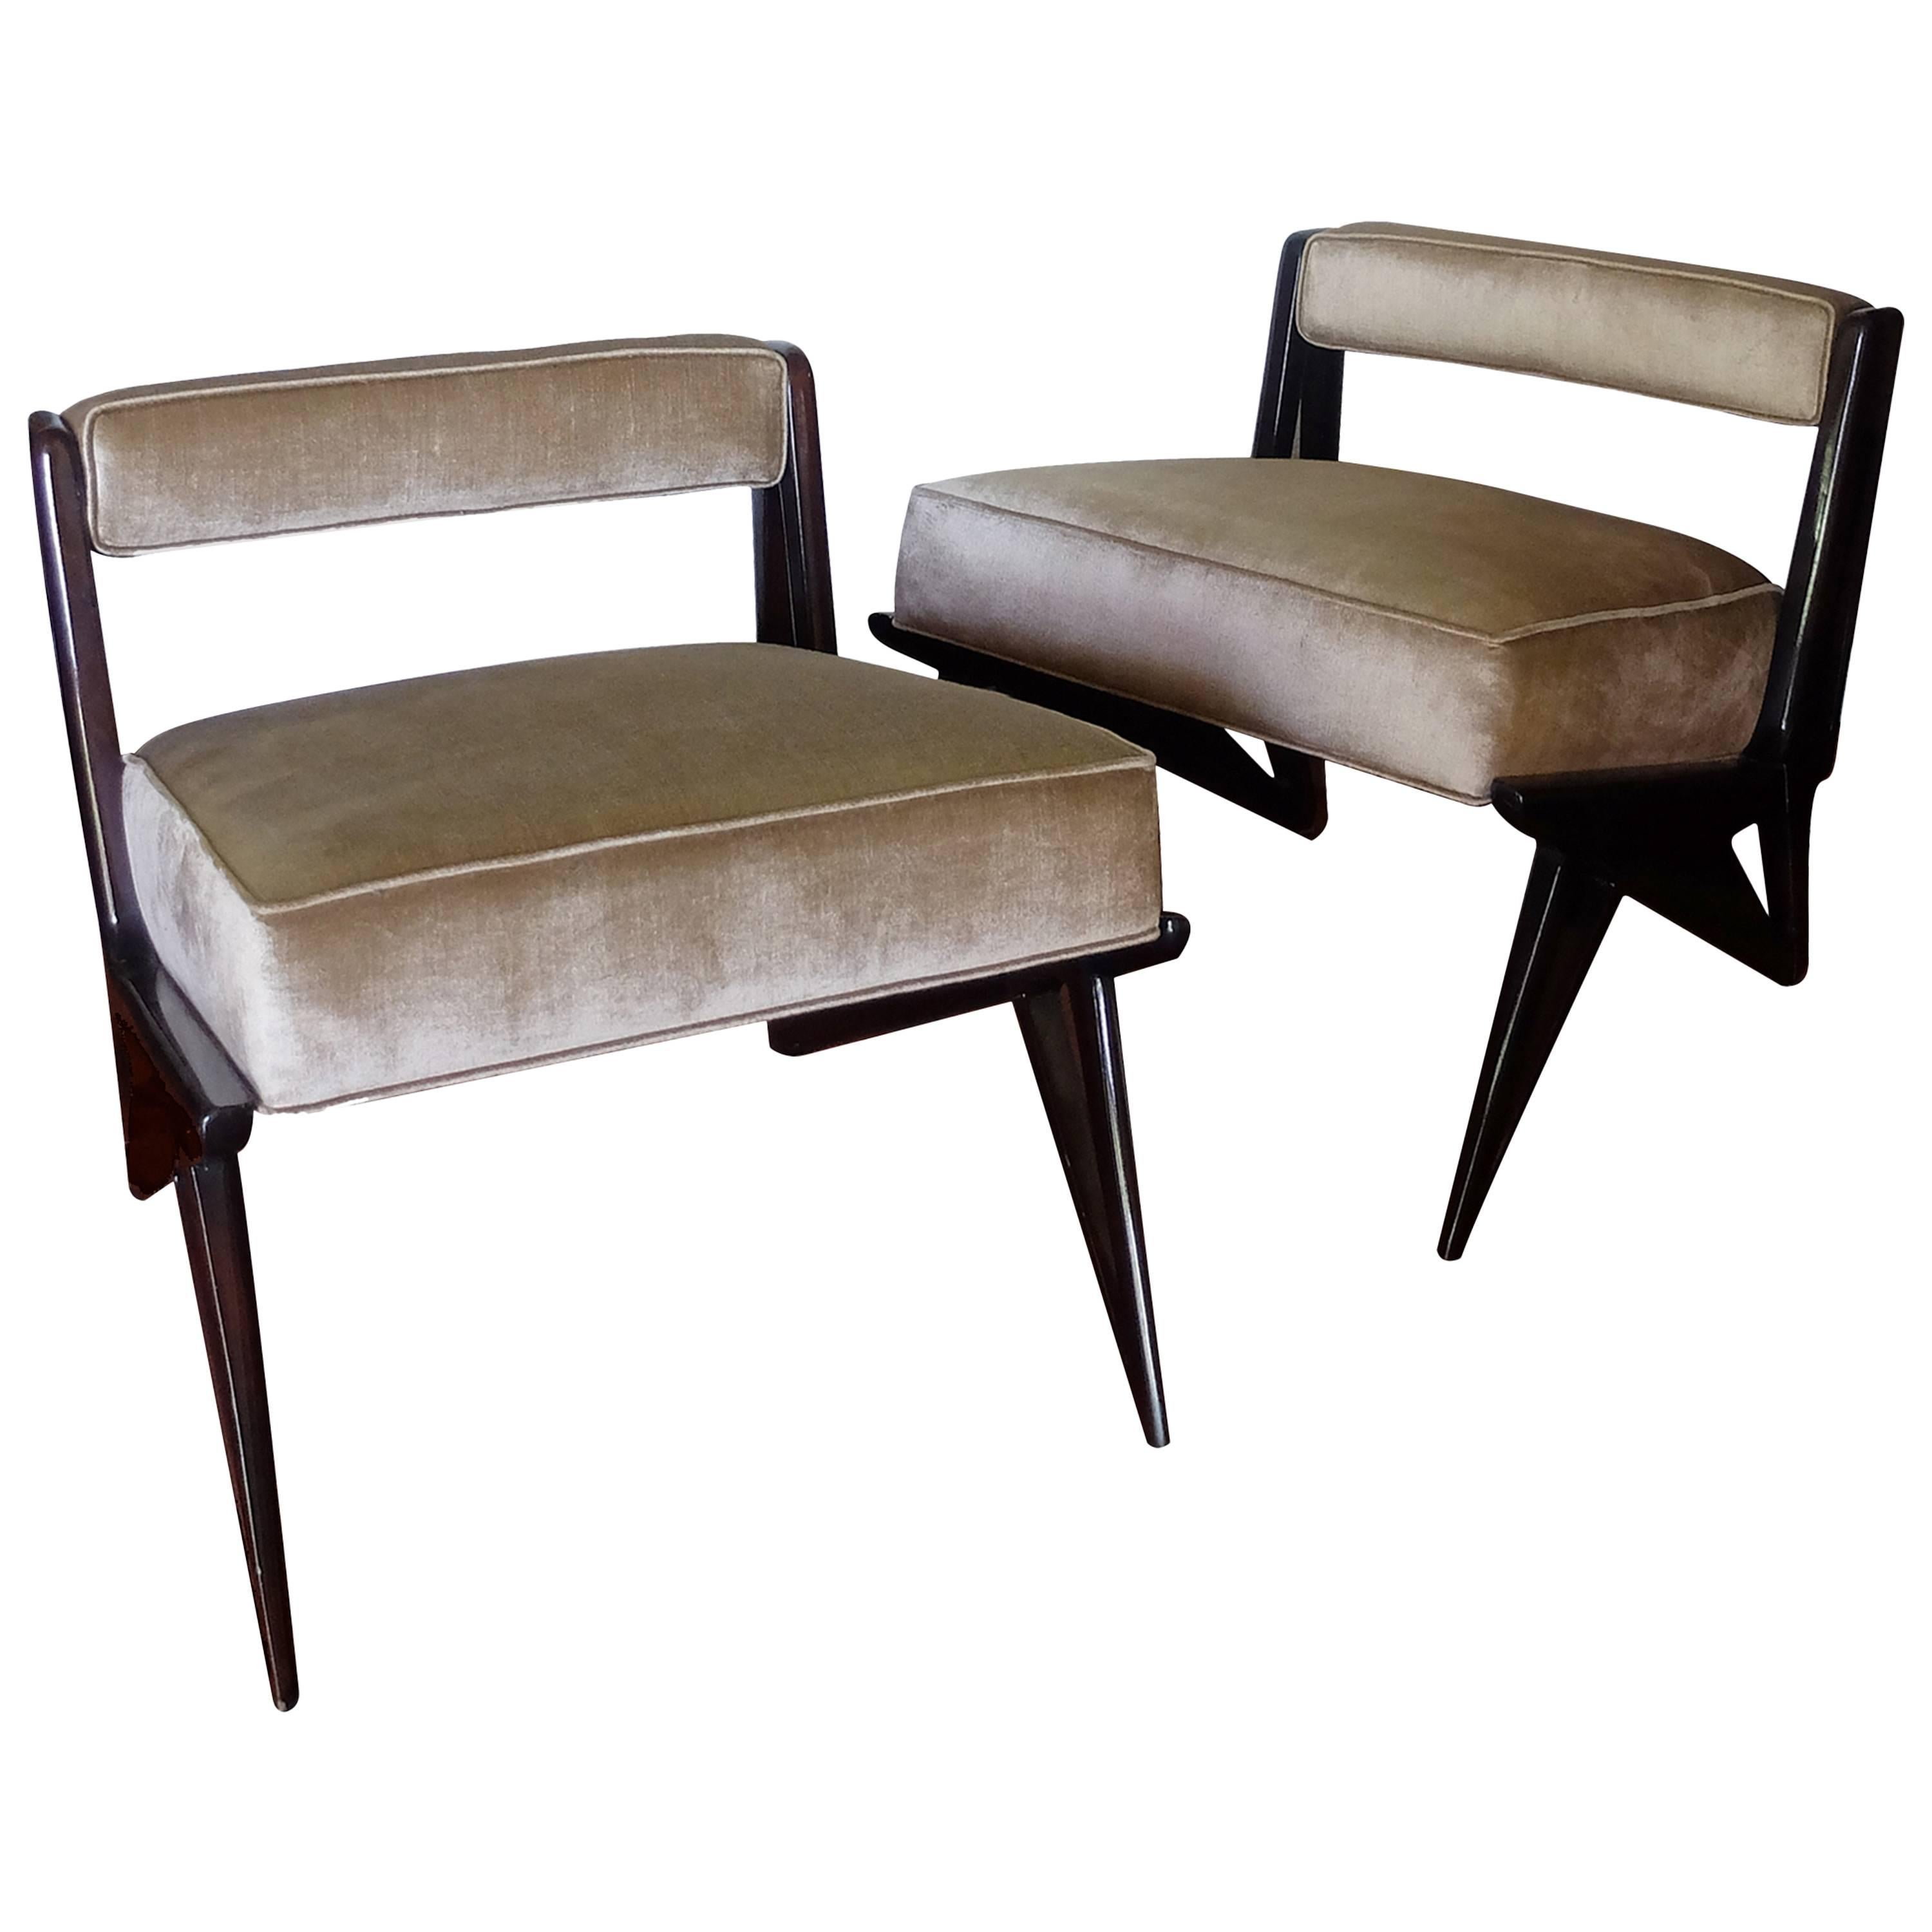 Pair of Modernist Armchairs in Pale Green Velvet Attributed to Ico Parisi, 1950s For Sale